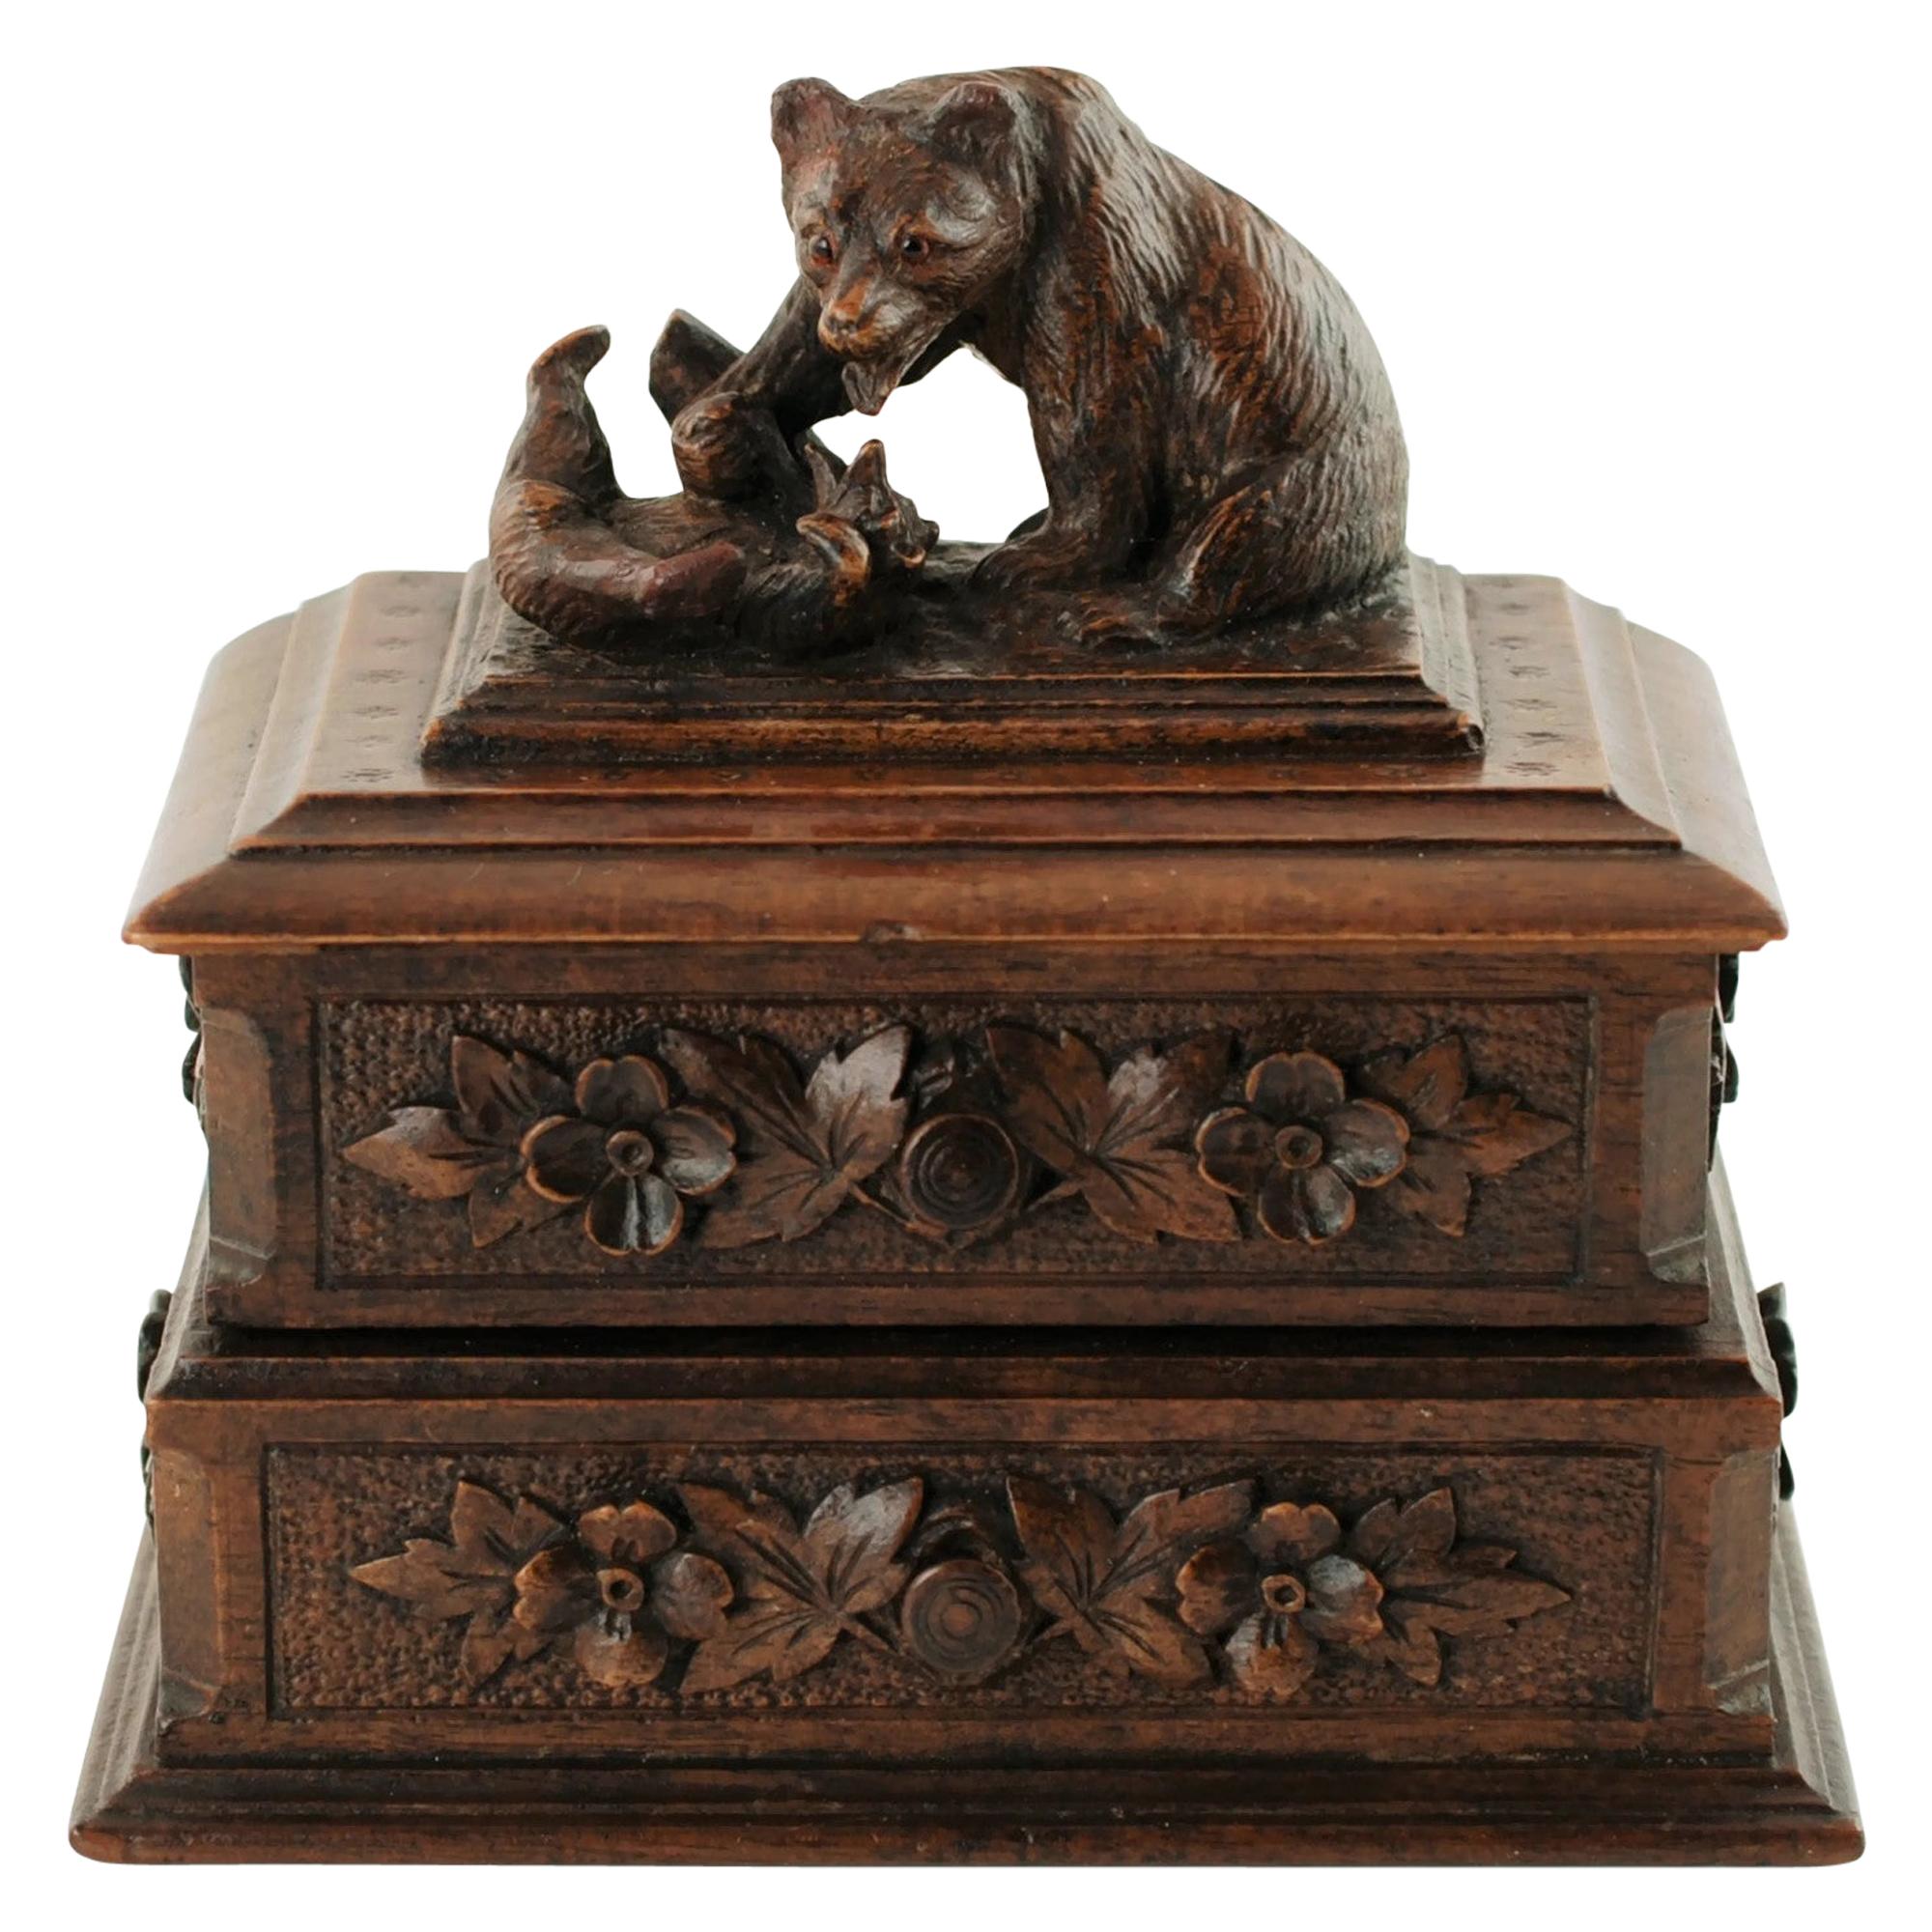 19th Century Black Forest Carved Bear Motif Wood Box with Swing-Out Compartment For Sale